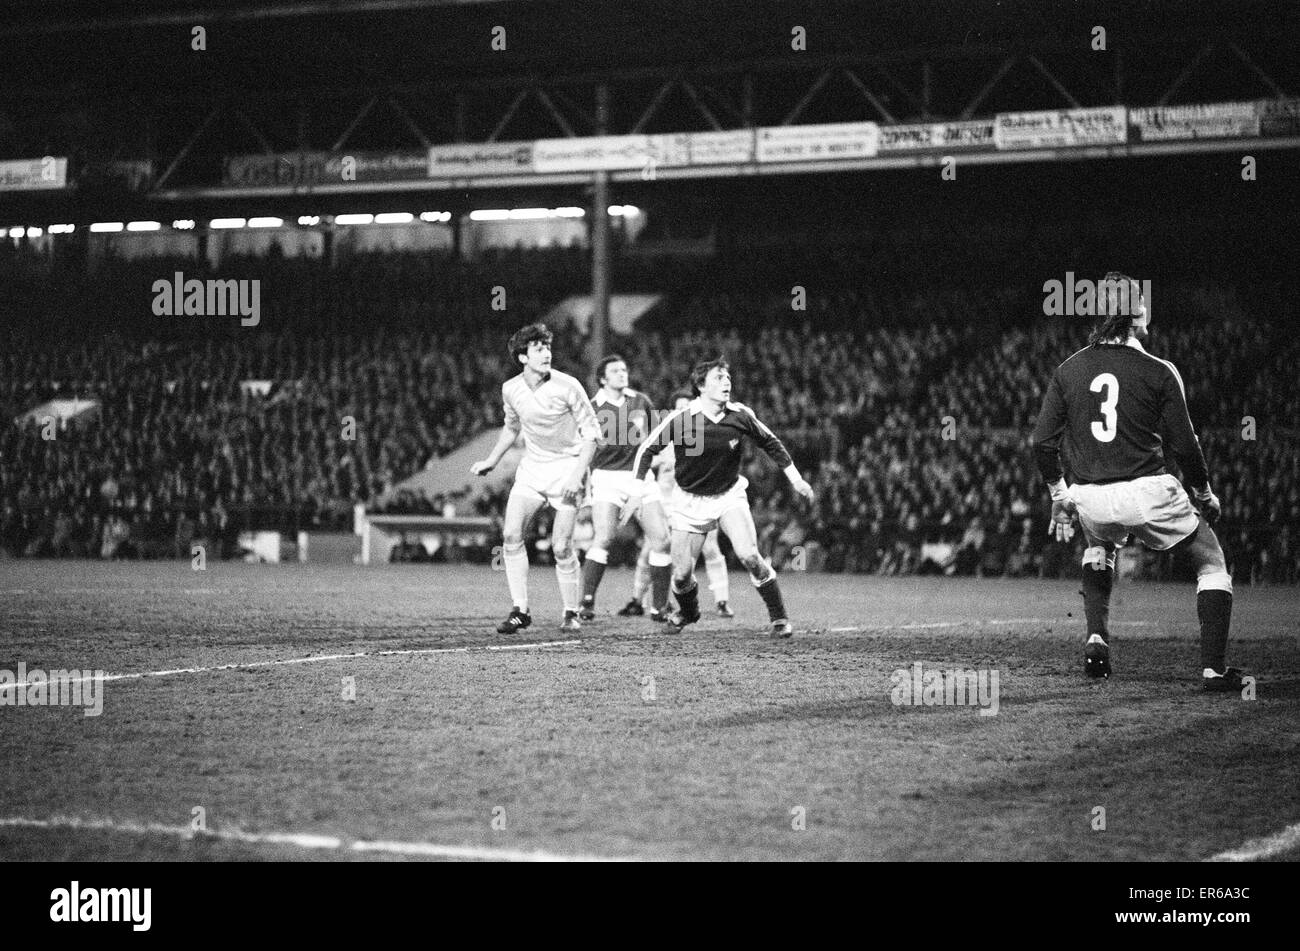 Nottingham Forest 1980 High Resolution Stock Photography and Images - Alamy